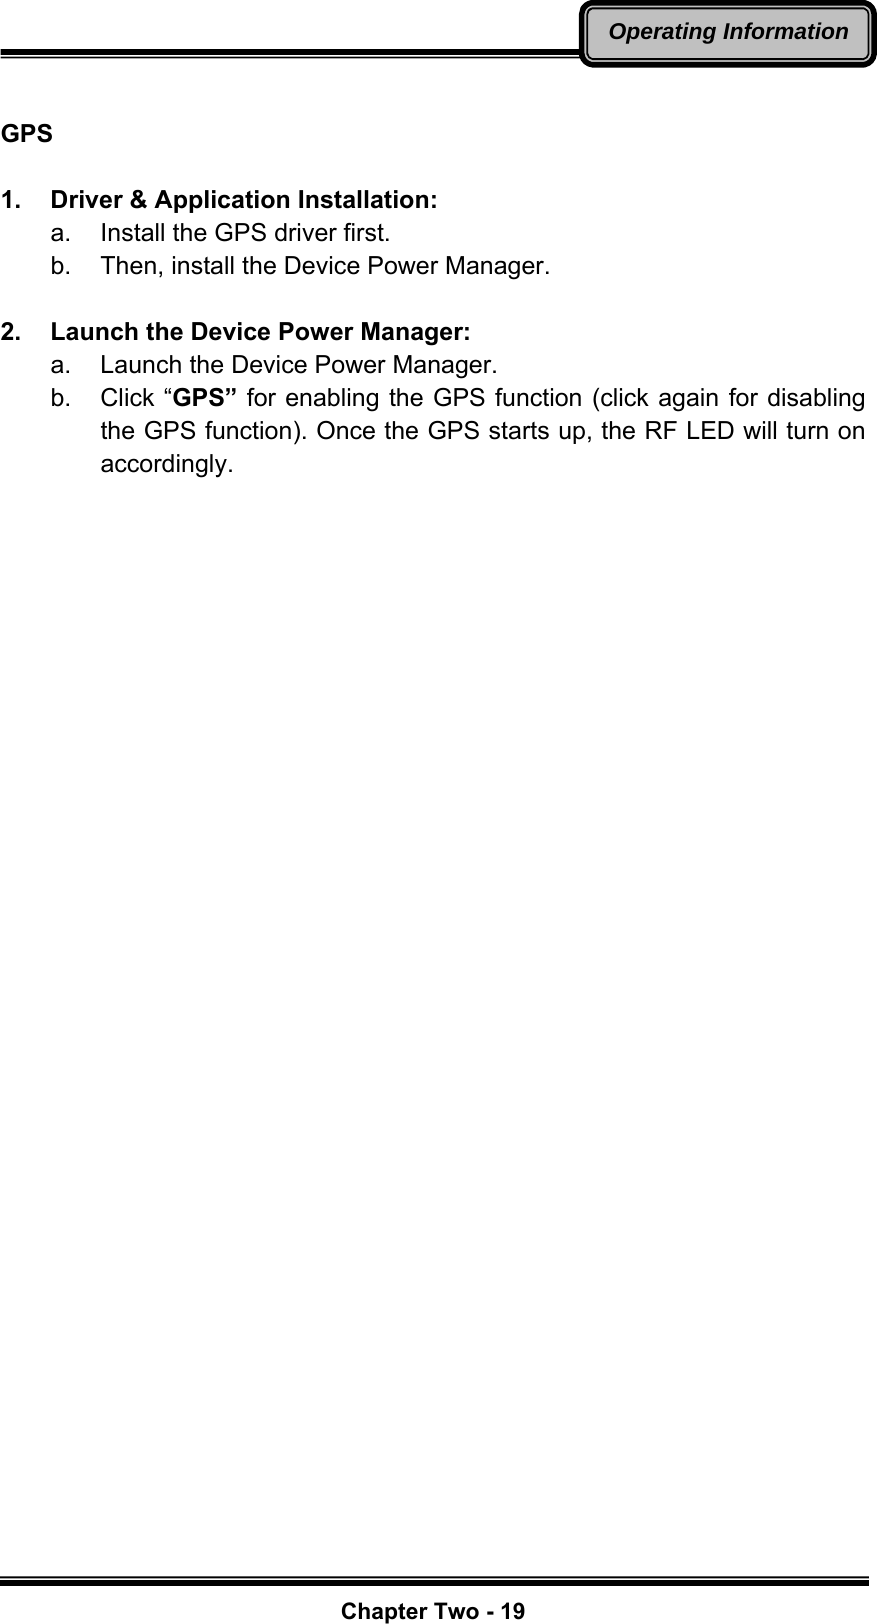   Chapter Two - 19Operating Information GPS  1.  Driver &amp; Application Installation: a.  Install the GPS driver first. b.  Then, install the Device Power Manager.  2.  Launch the Device Power Manager: a.  Launch the Device Power Manager. b. Click “GPS” for enabling the GPS function (click again for disabling the GPS function). Once the GPS starts up, the RF LED will turn on accordingly.         